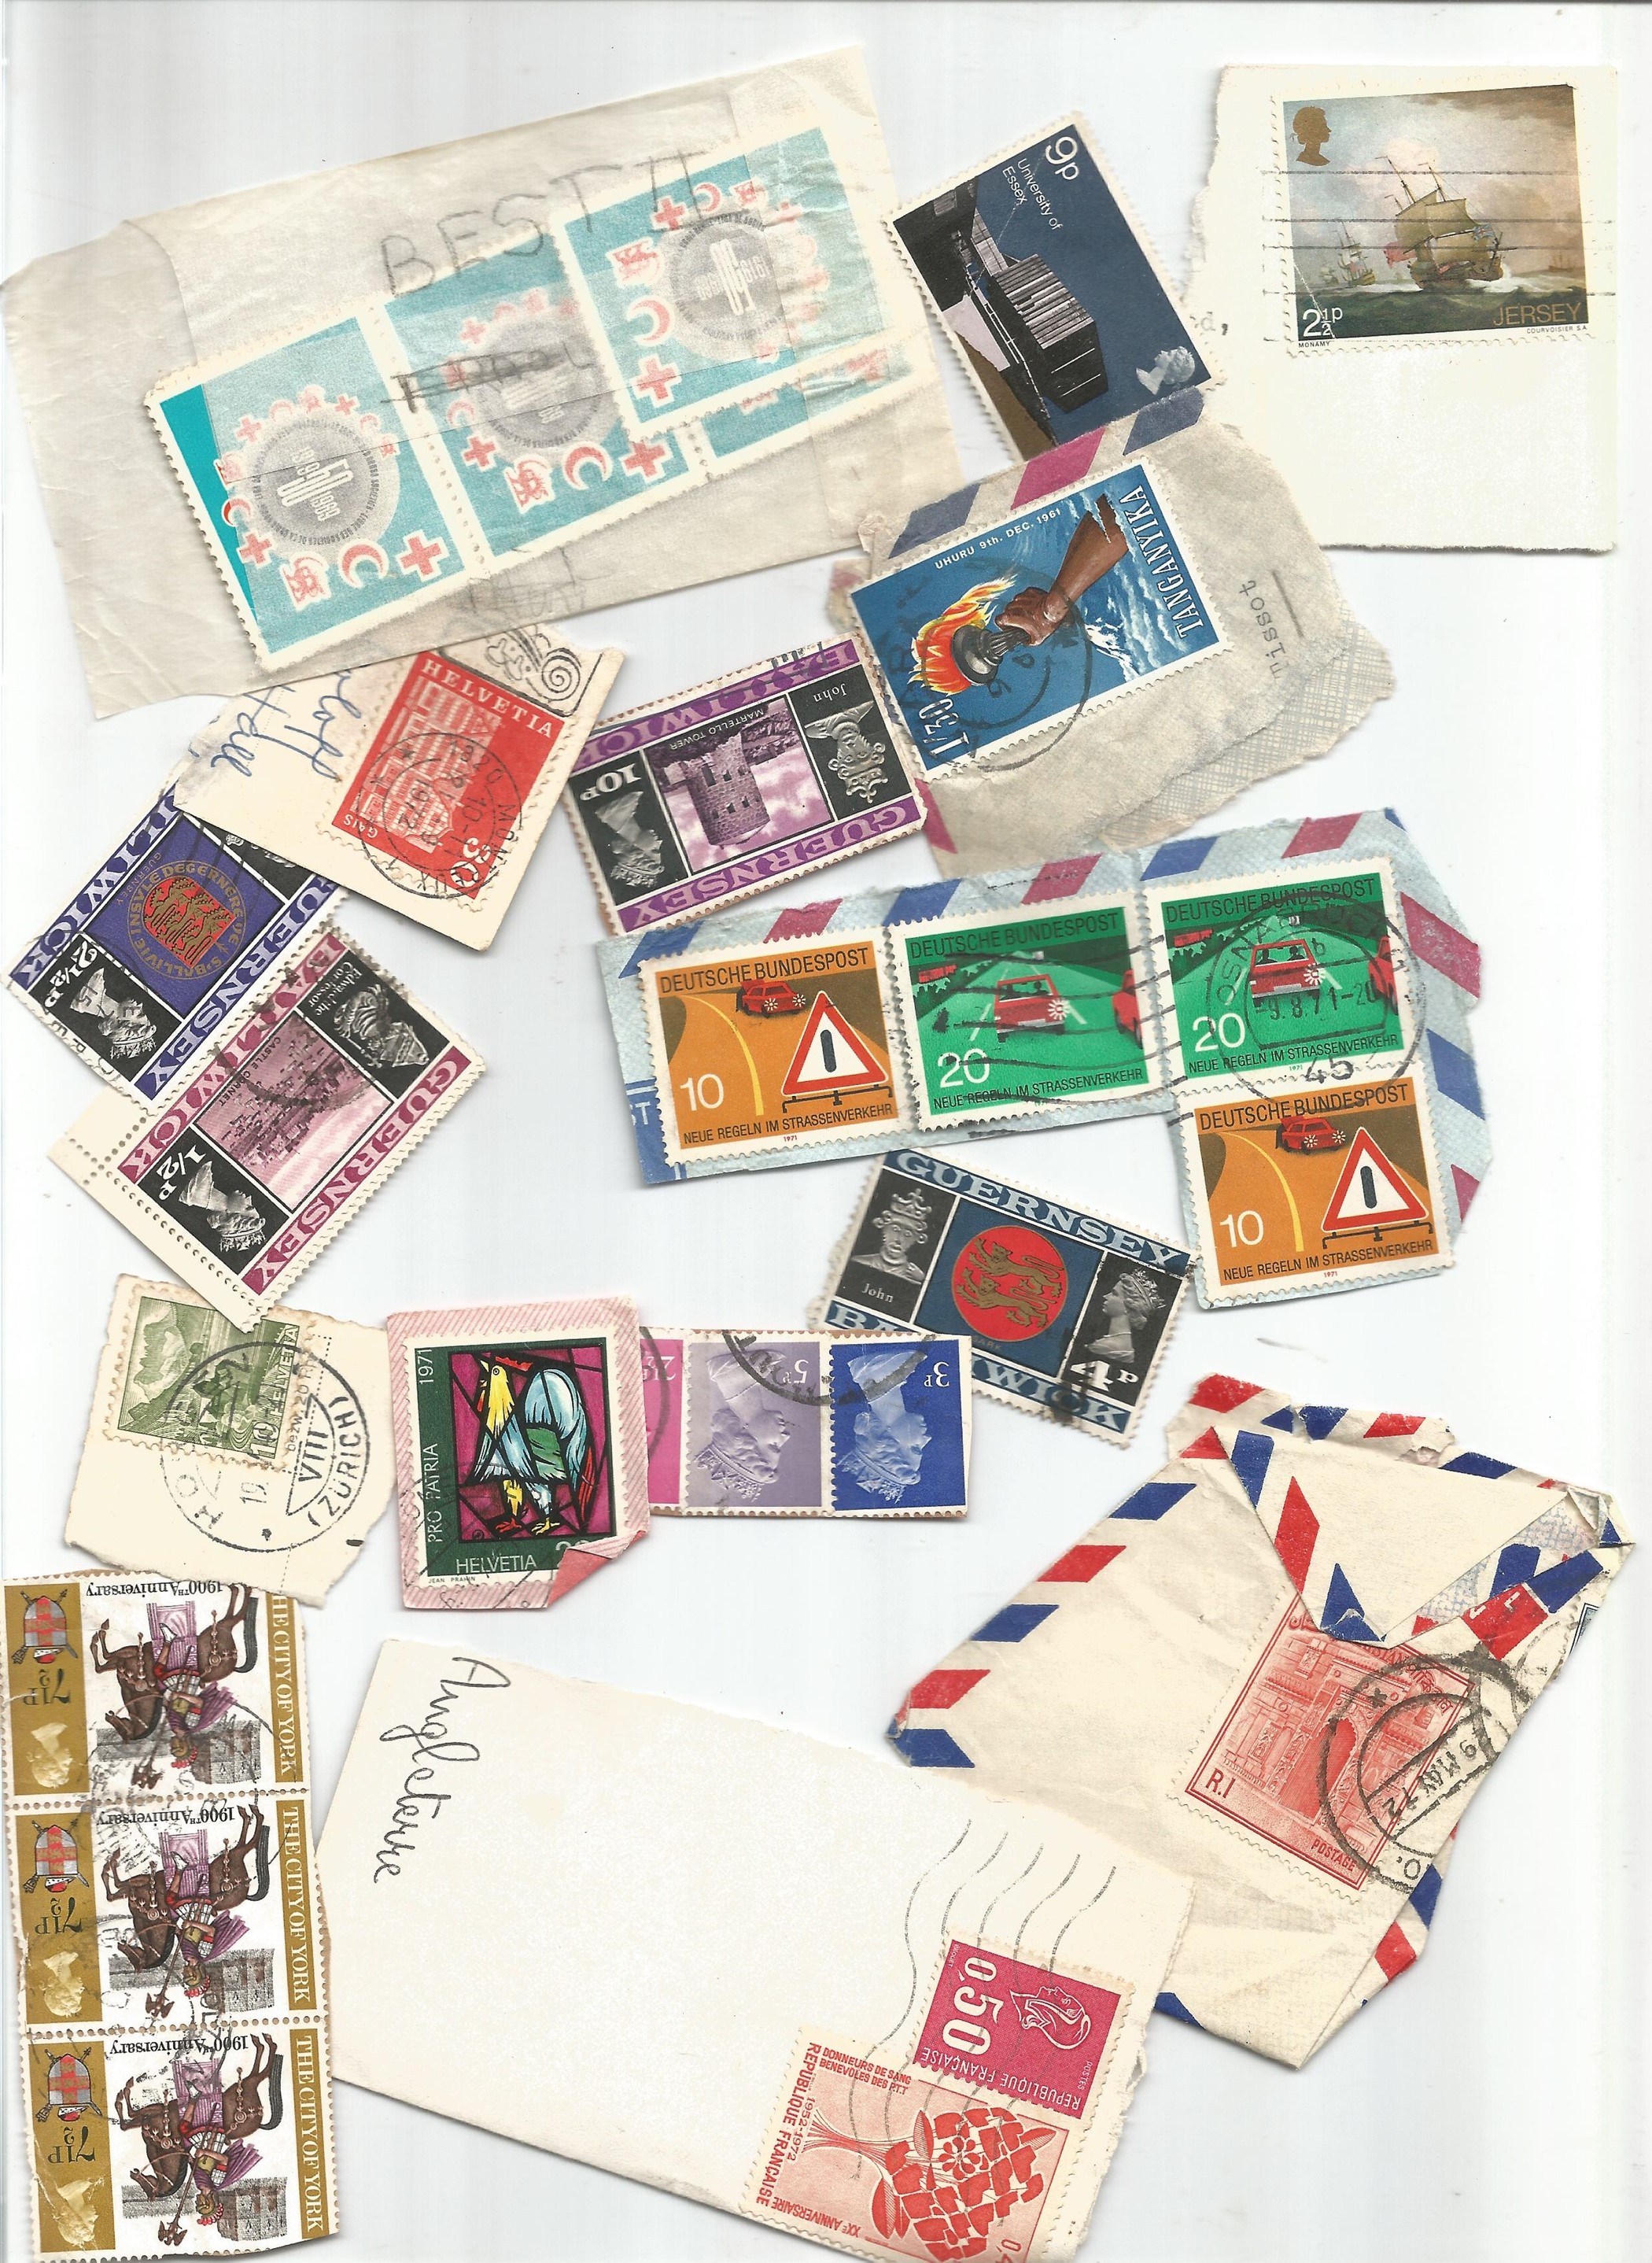 Assorted world stamp collection. Mixed on and off backing paper. May have some value hidden. Good